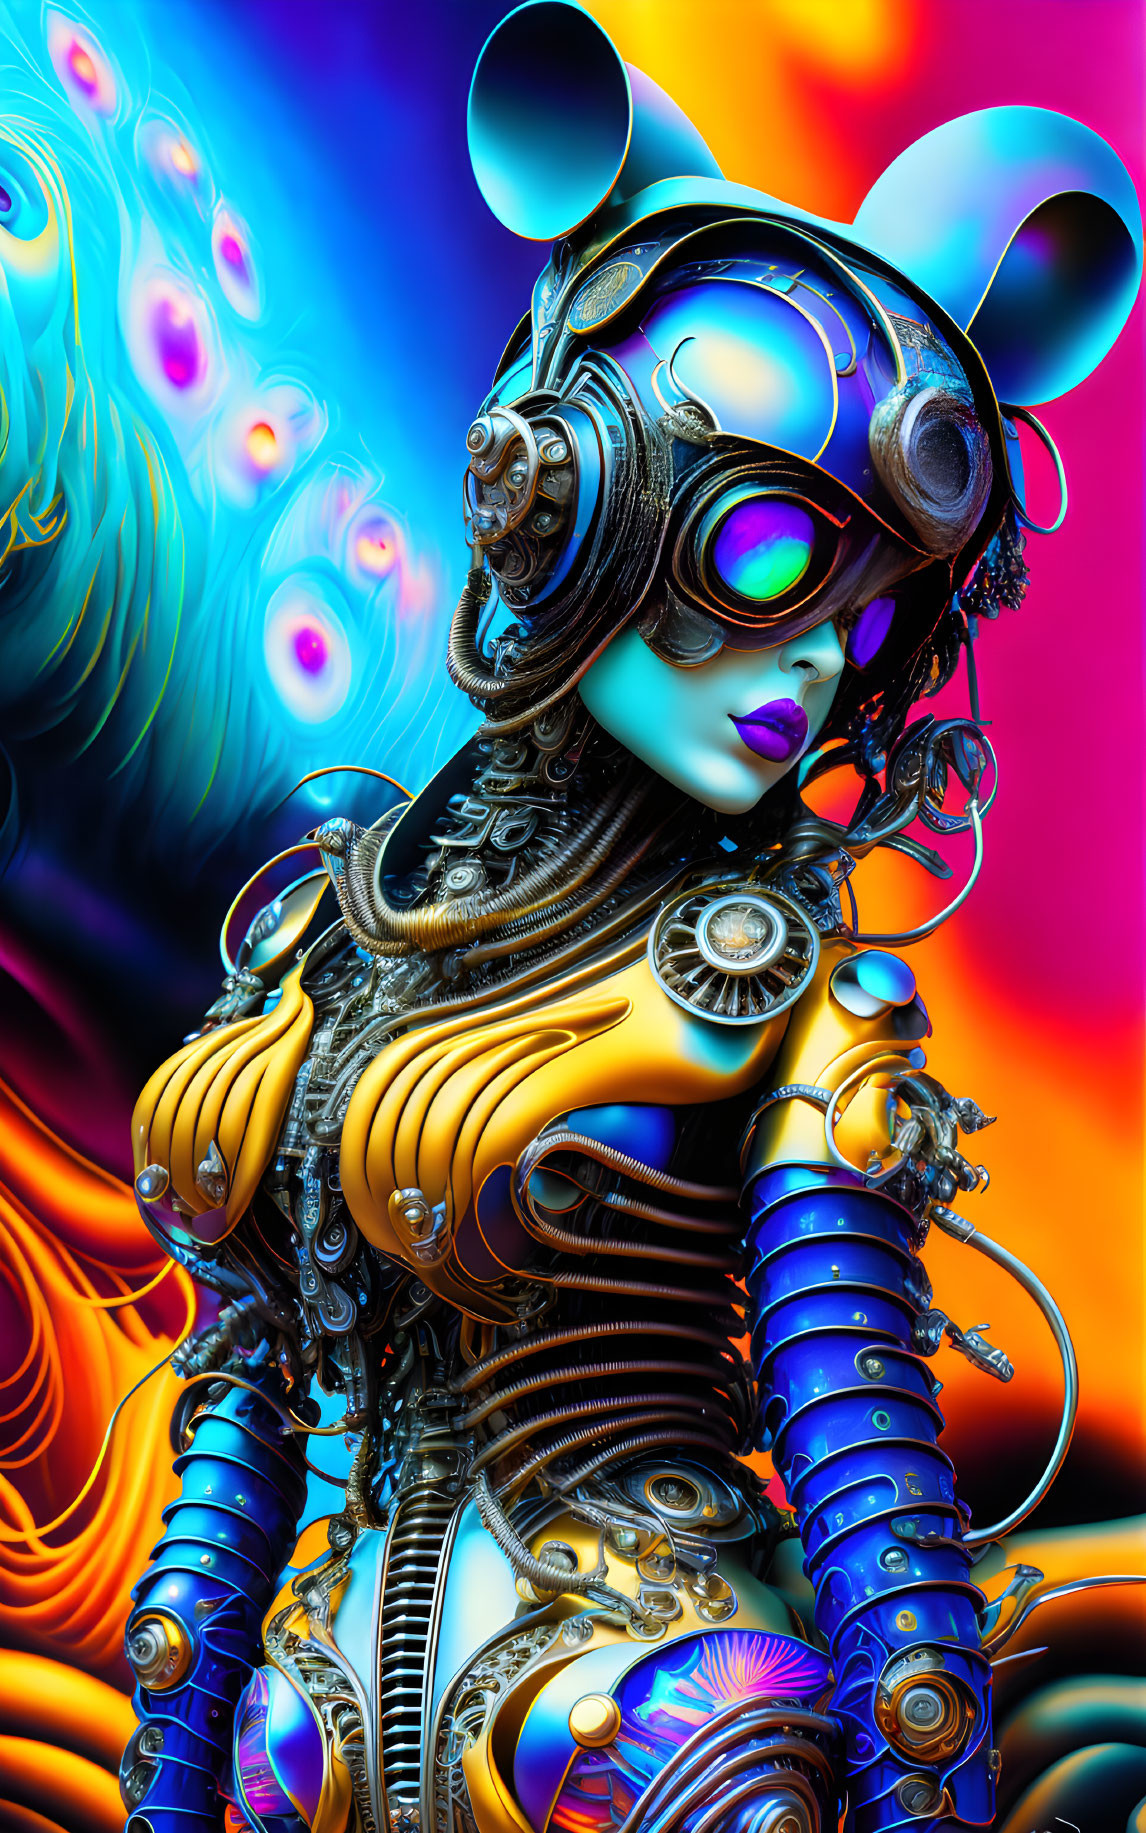 Vividly colored futuristic digital artwork of female figure with robotic attire and peacock feather motifs